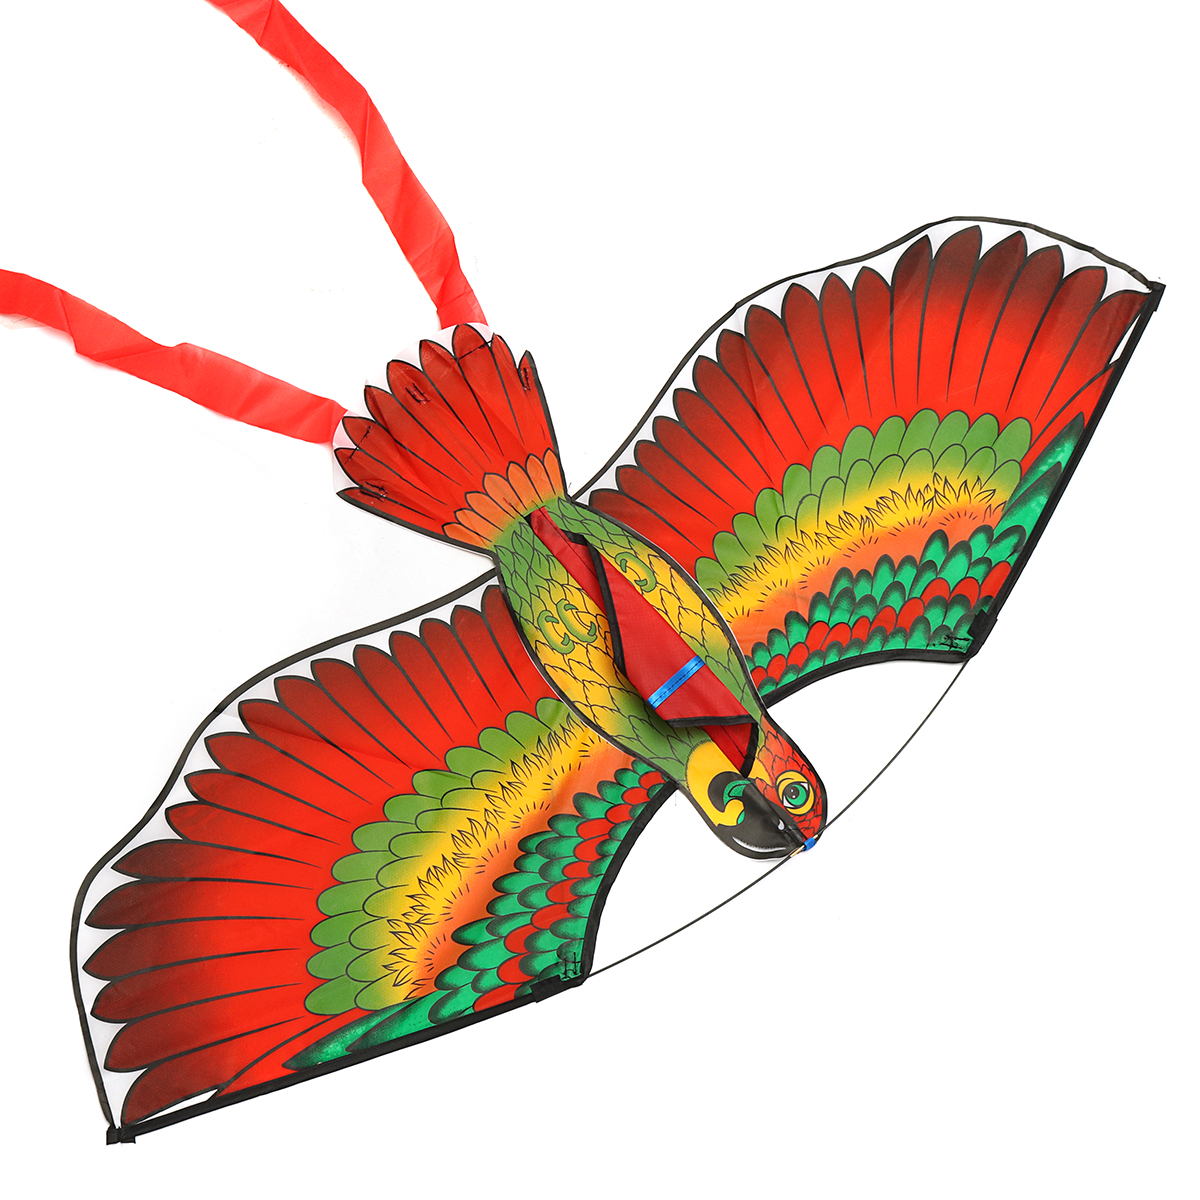 Outdoor-Beach-Park-Polyester-Camping-Flying-Kite-Bird-Parrot-Steady-With-String-Spool-For-Adults-Kid-1347624